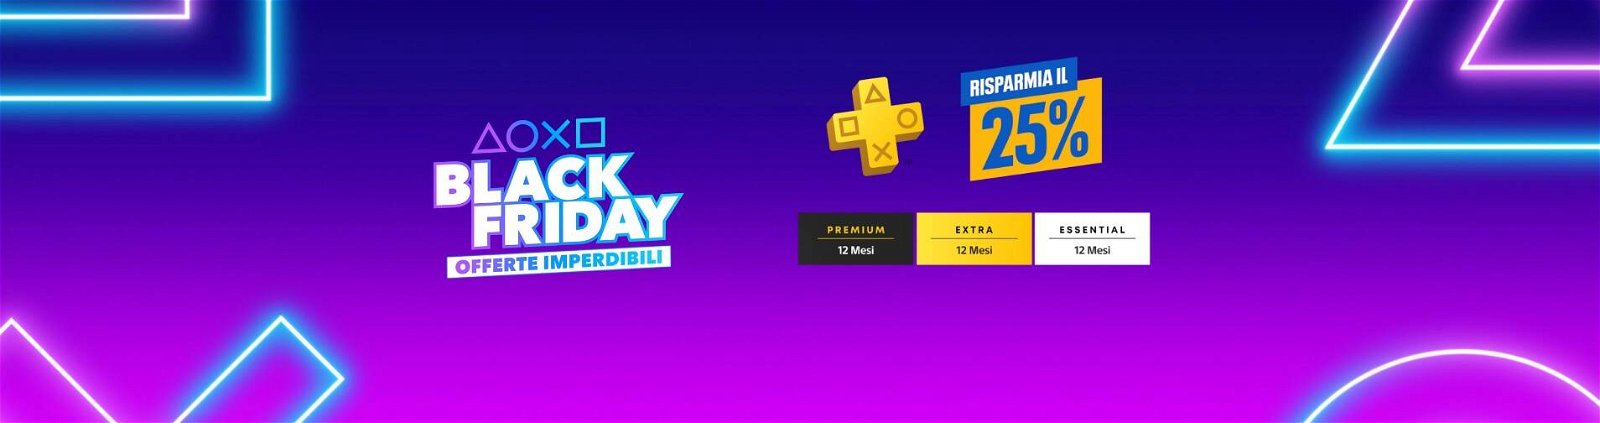 https://cdn.spaziogames.it/storage/wp/new-images/2022/11/playstation-plus-black-friday-52787.jpg